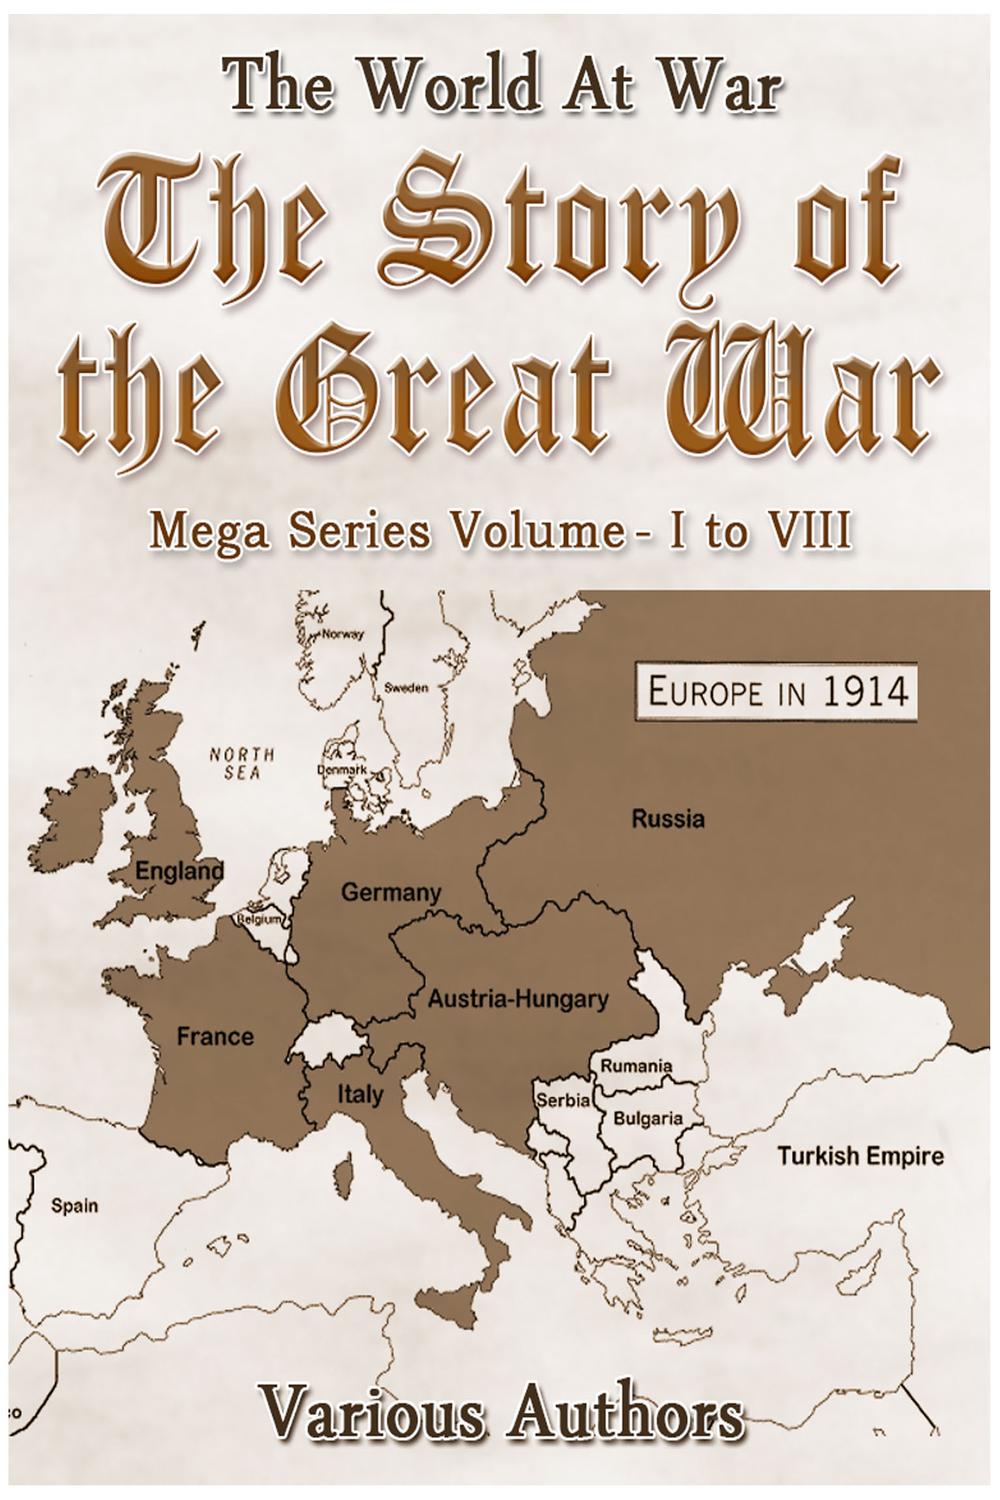 The Story of the Great War, Mega Series Volume I to VIII - Various